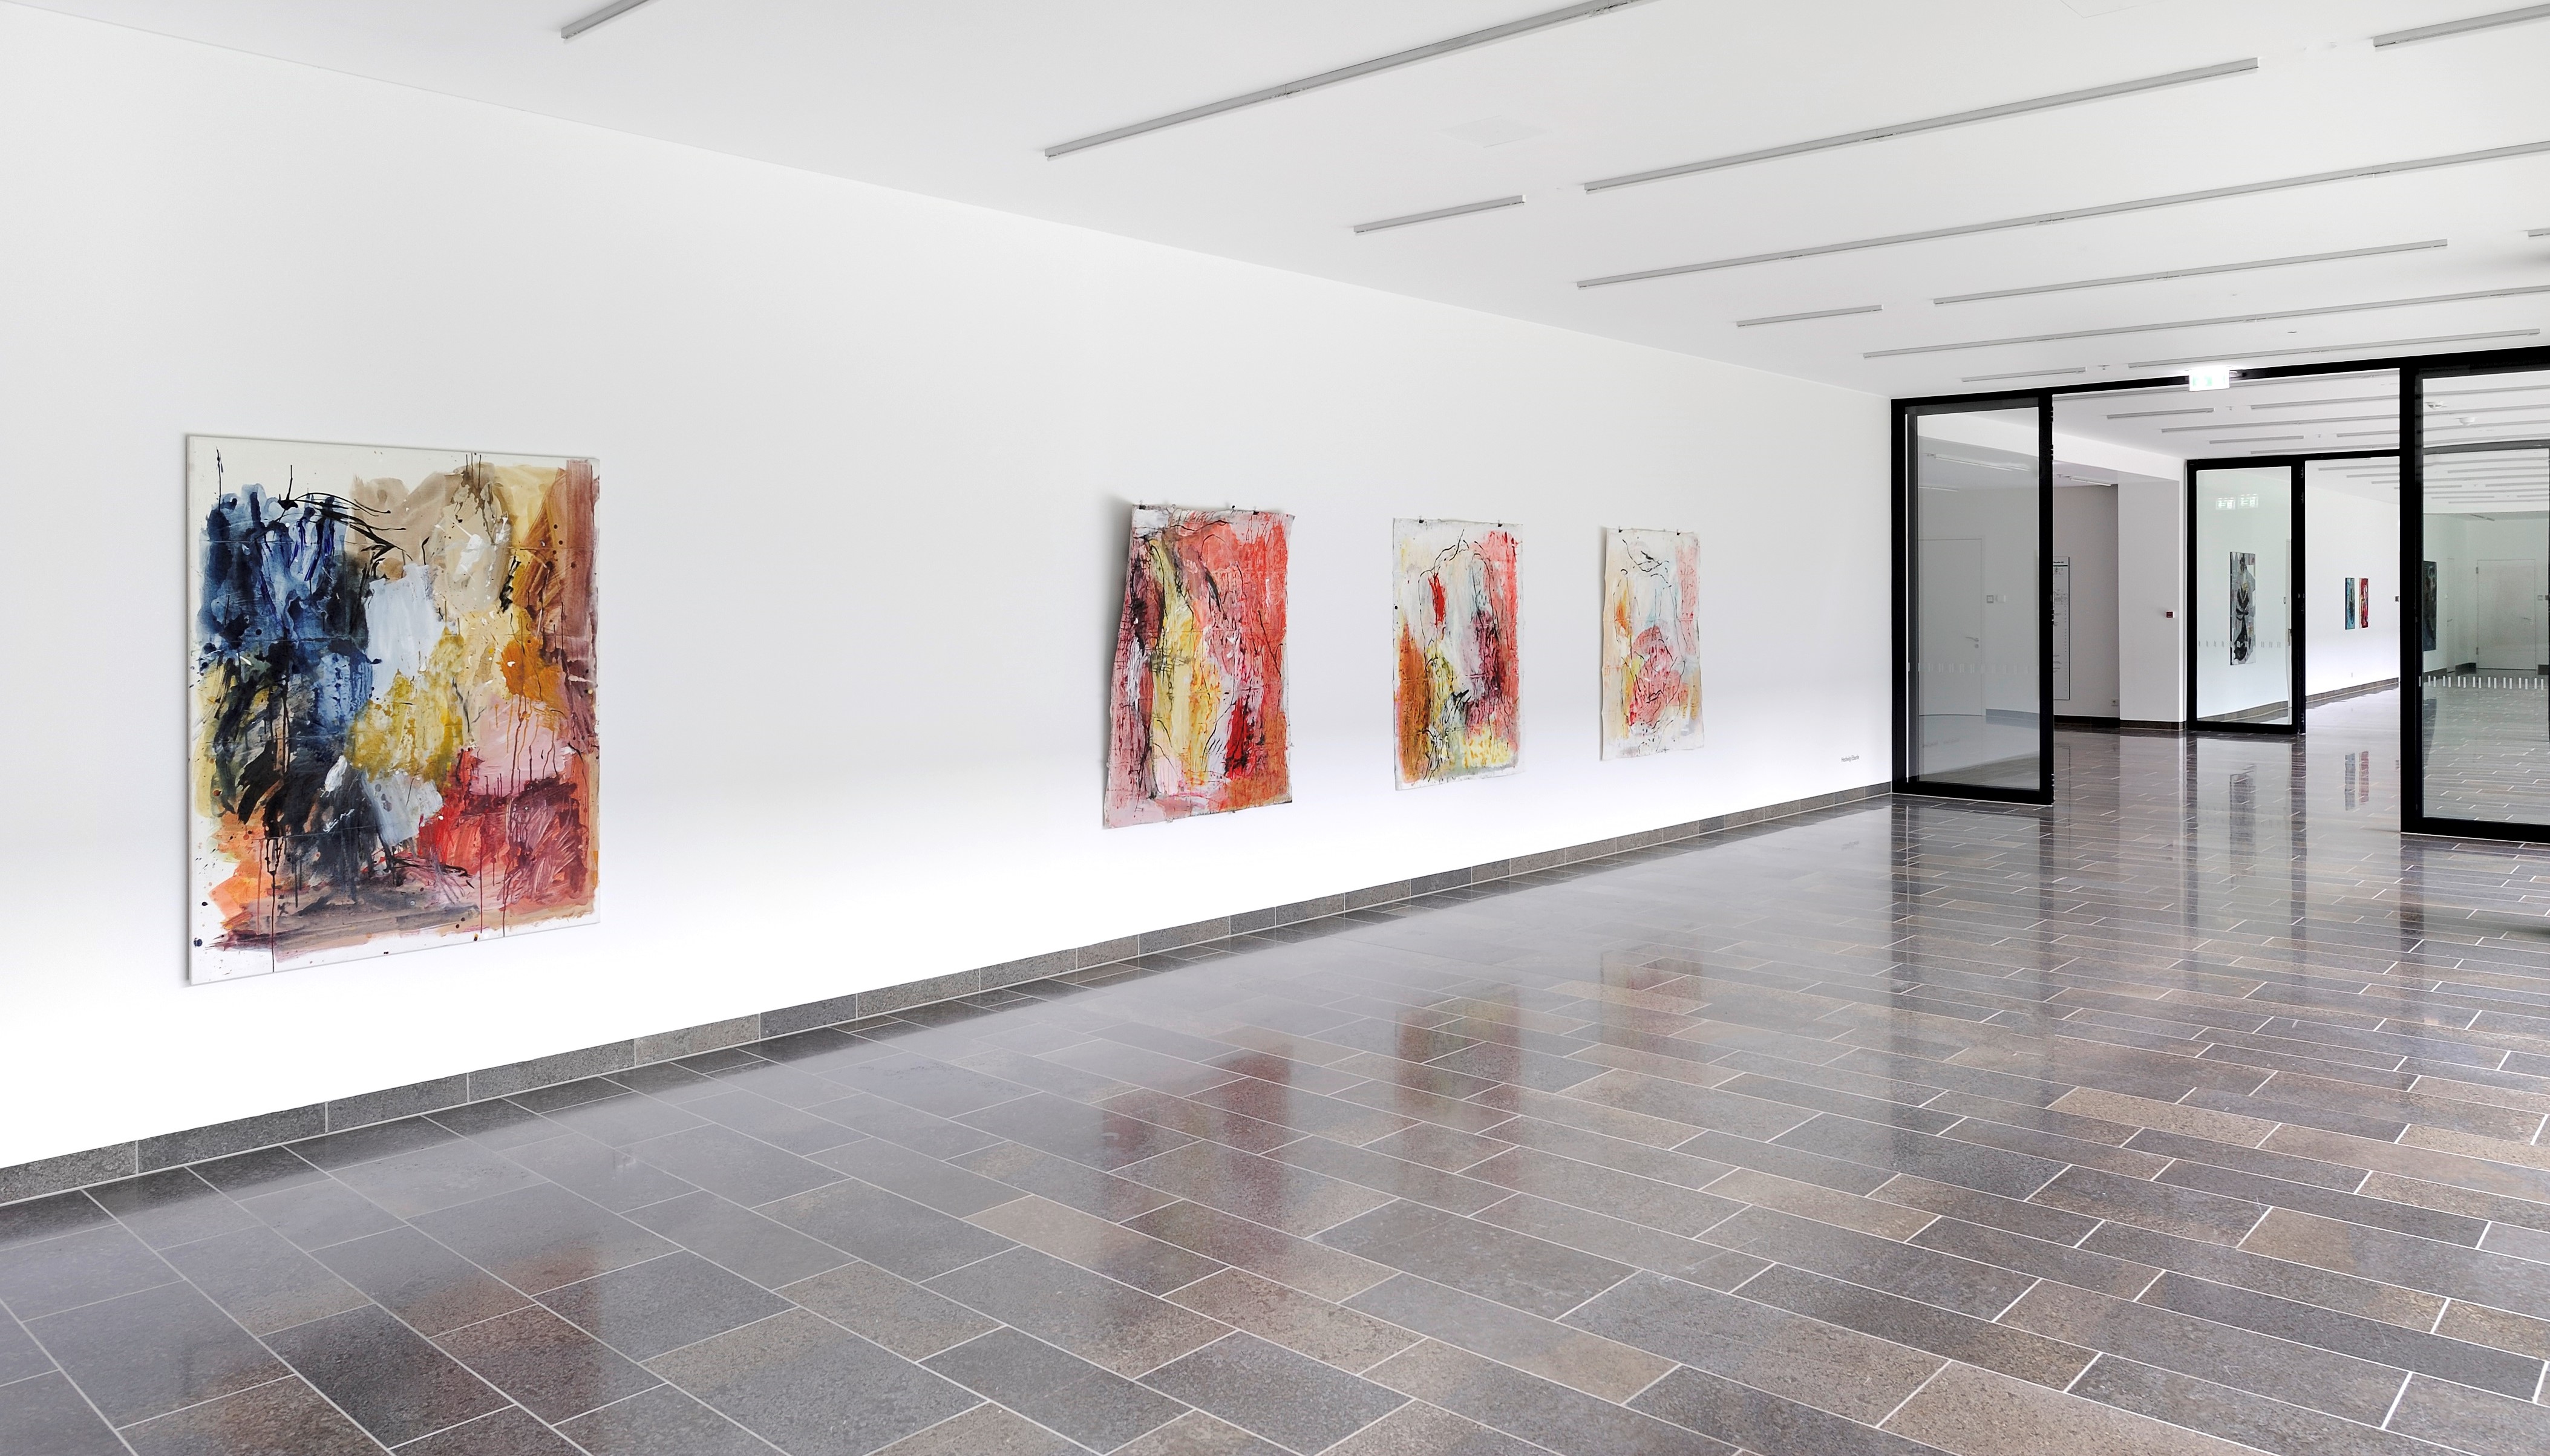 Hedwig Eberle (Exhibition view)